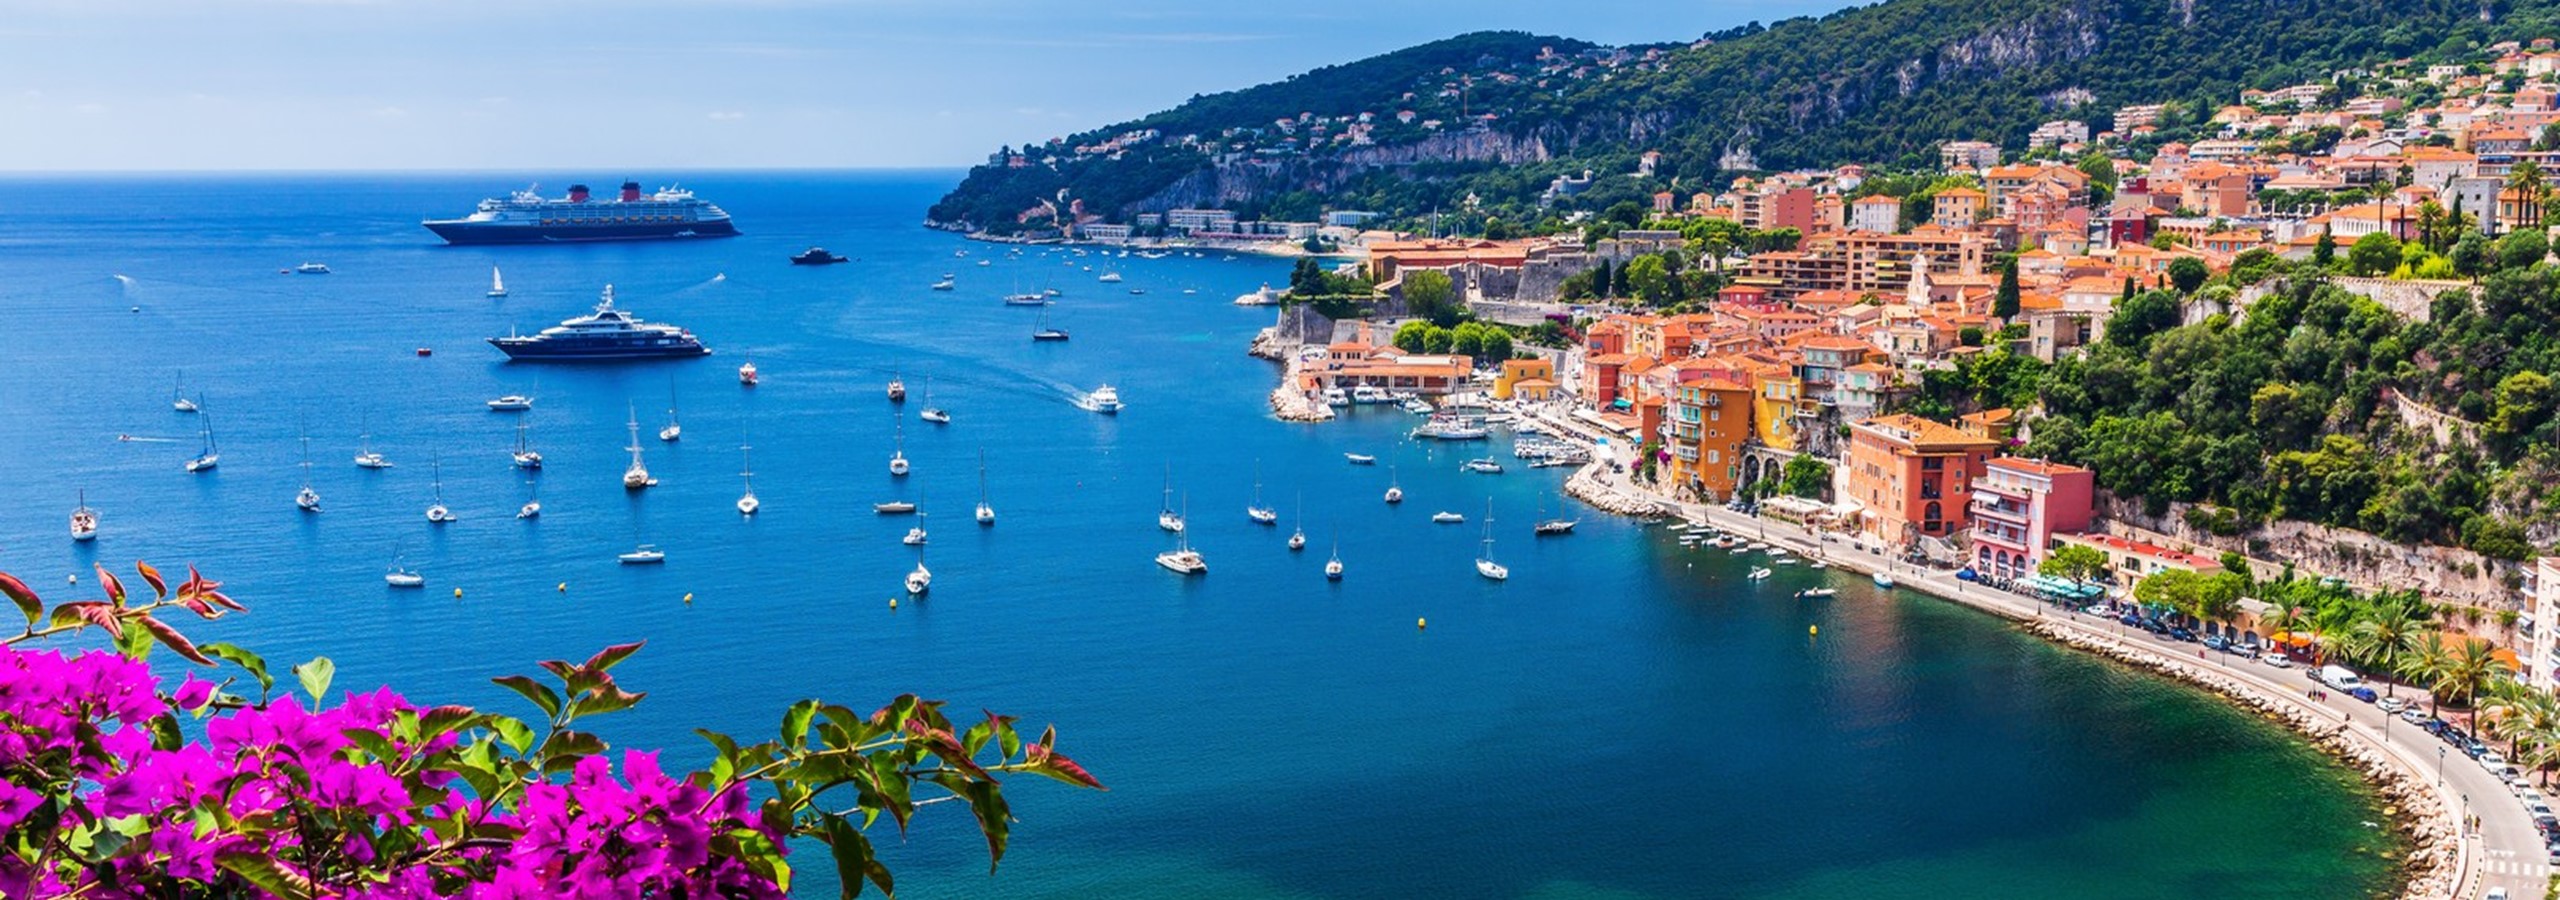 Villefranche - The Heart of the French Riviera